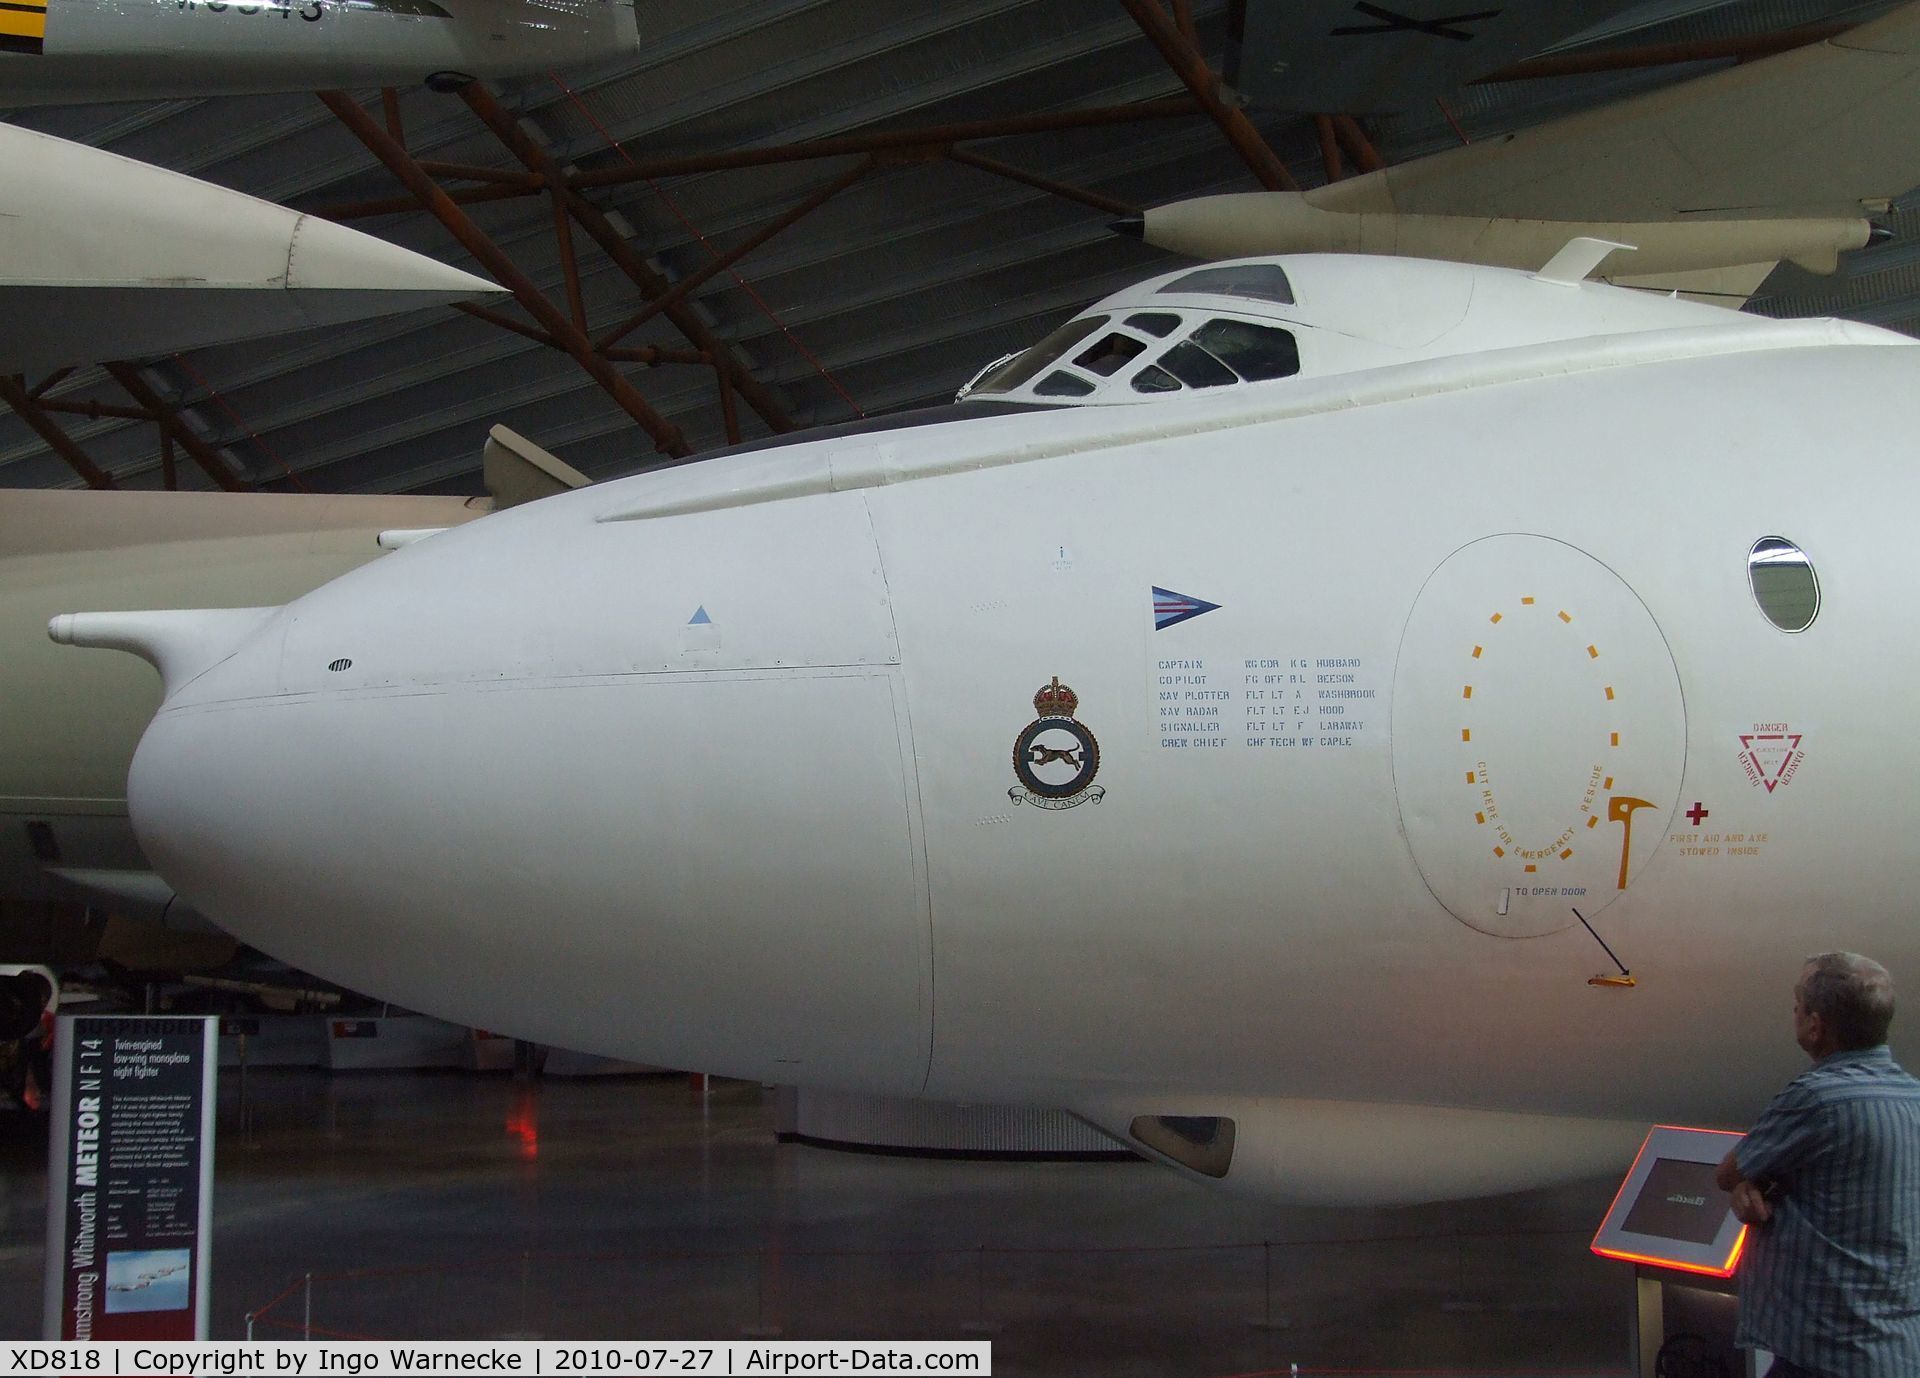 XD818, 1956 Vickers Valiant BK.1 C/N Not Found XD875, Vickers Valiant BK1 at the RAF Museum, Cosford